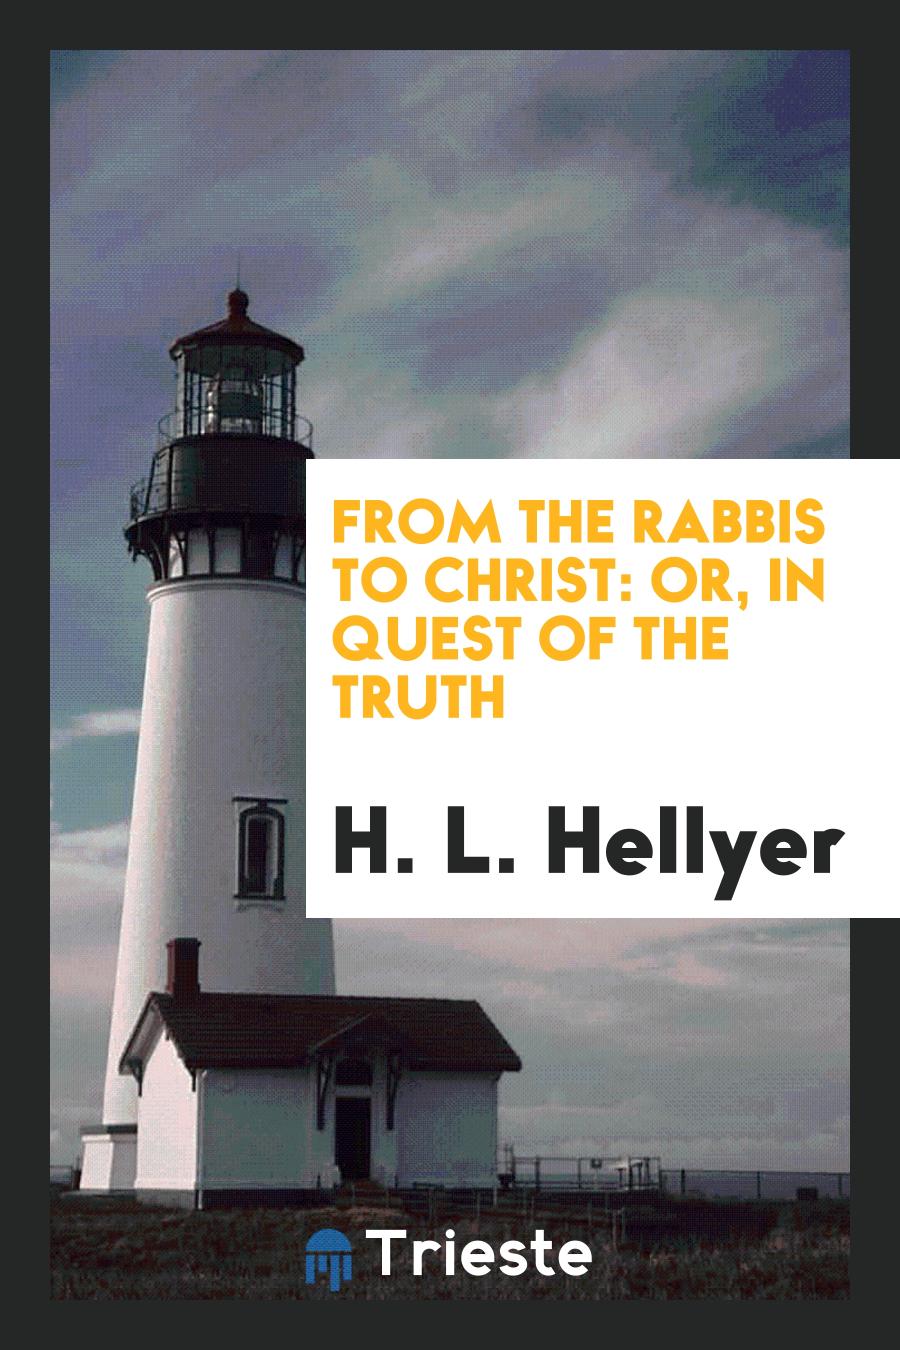 From the Rabbis to Christ: Or, In Quest of the Truth